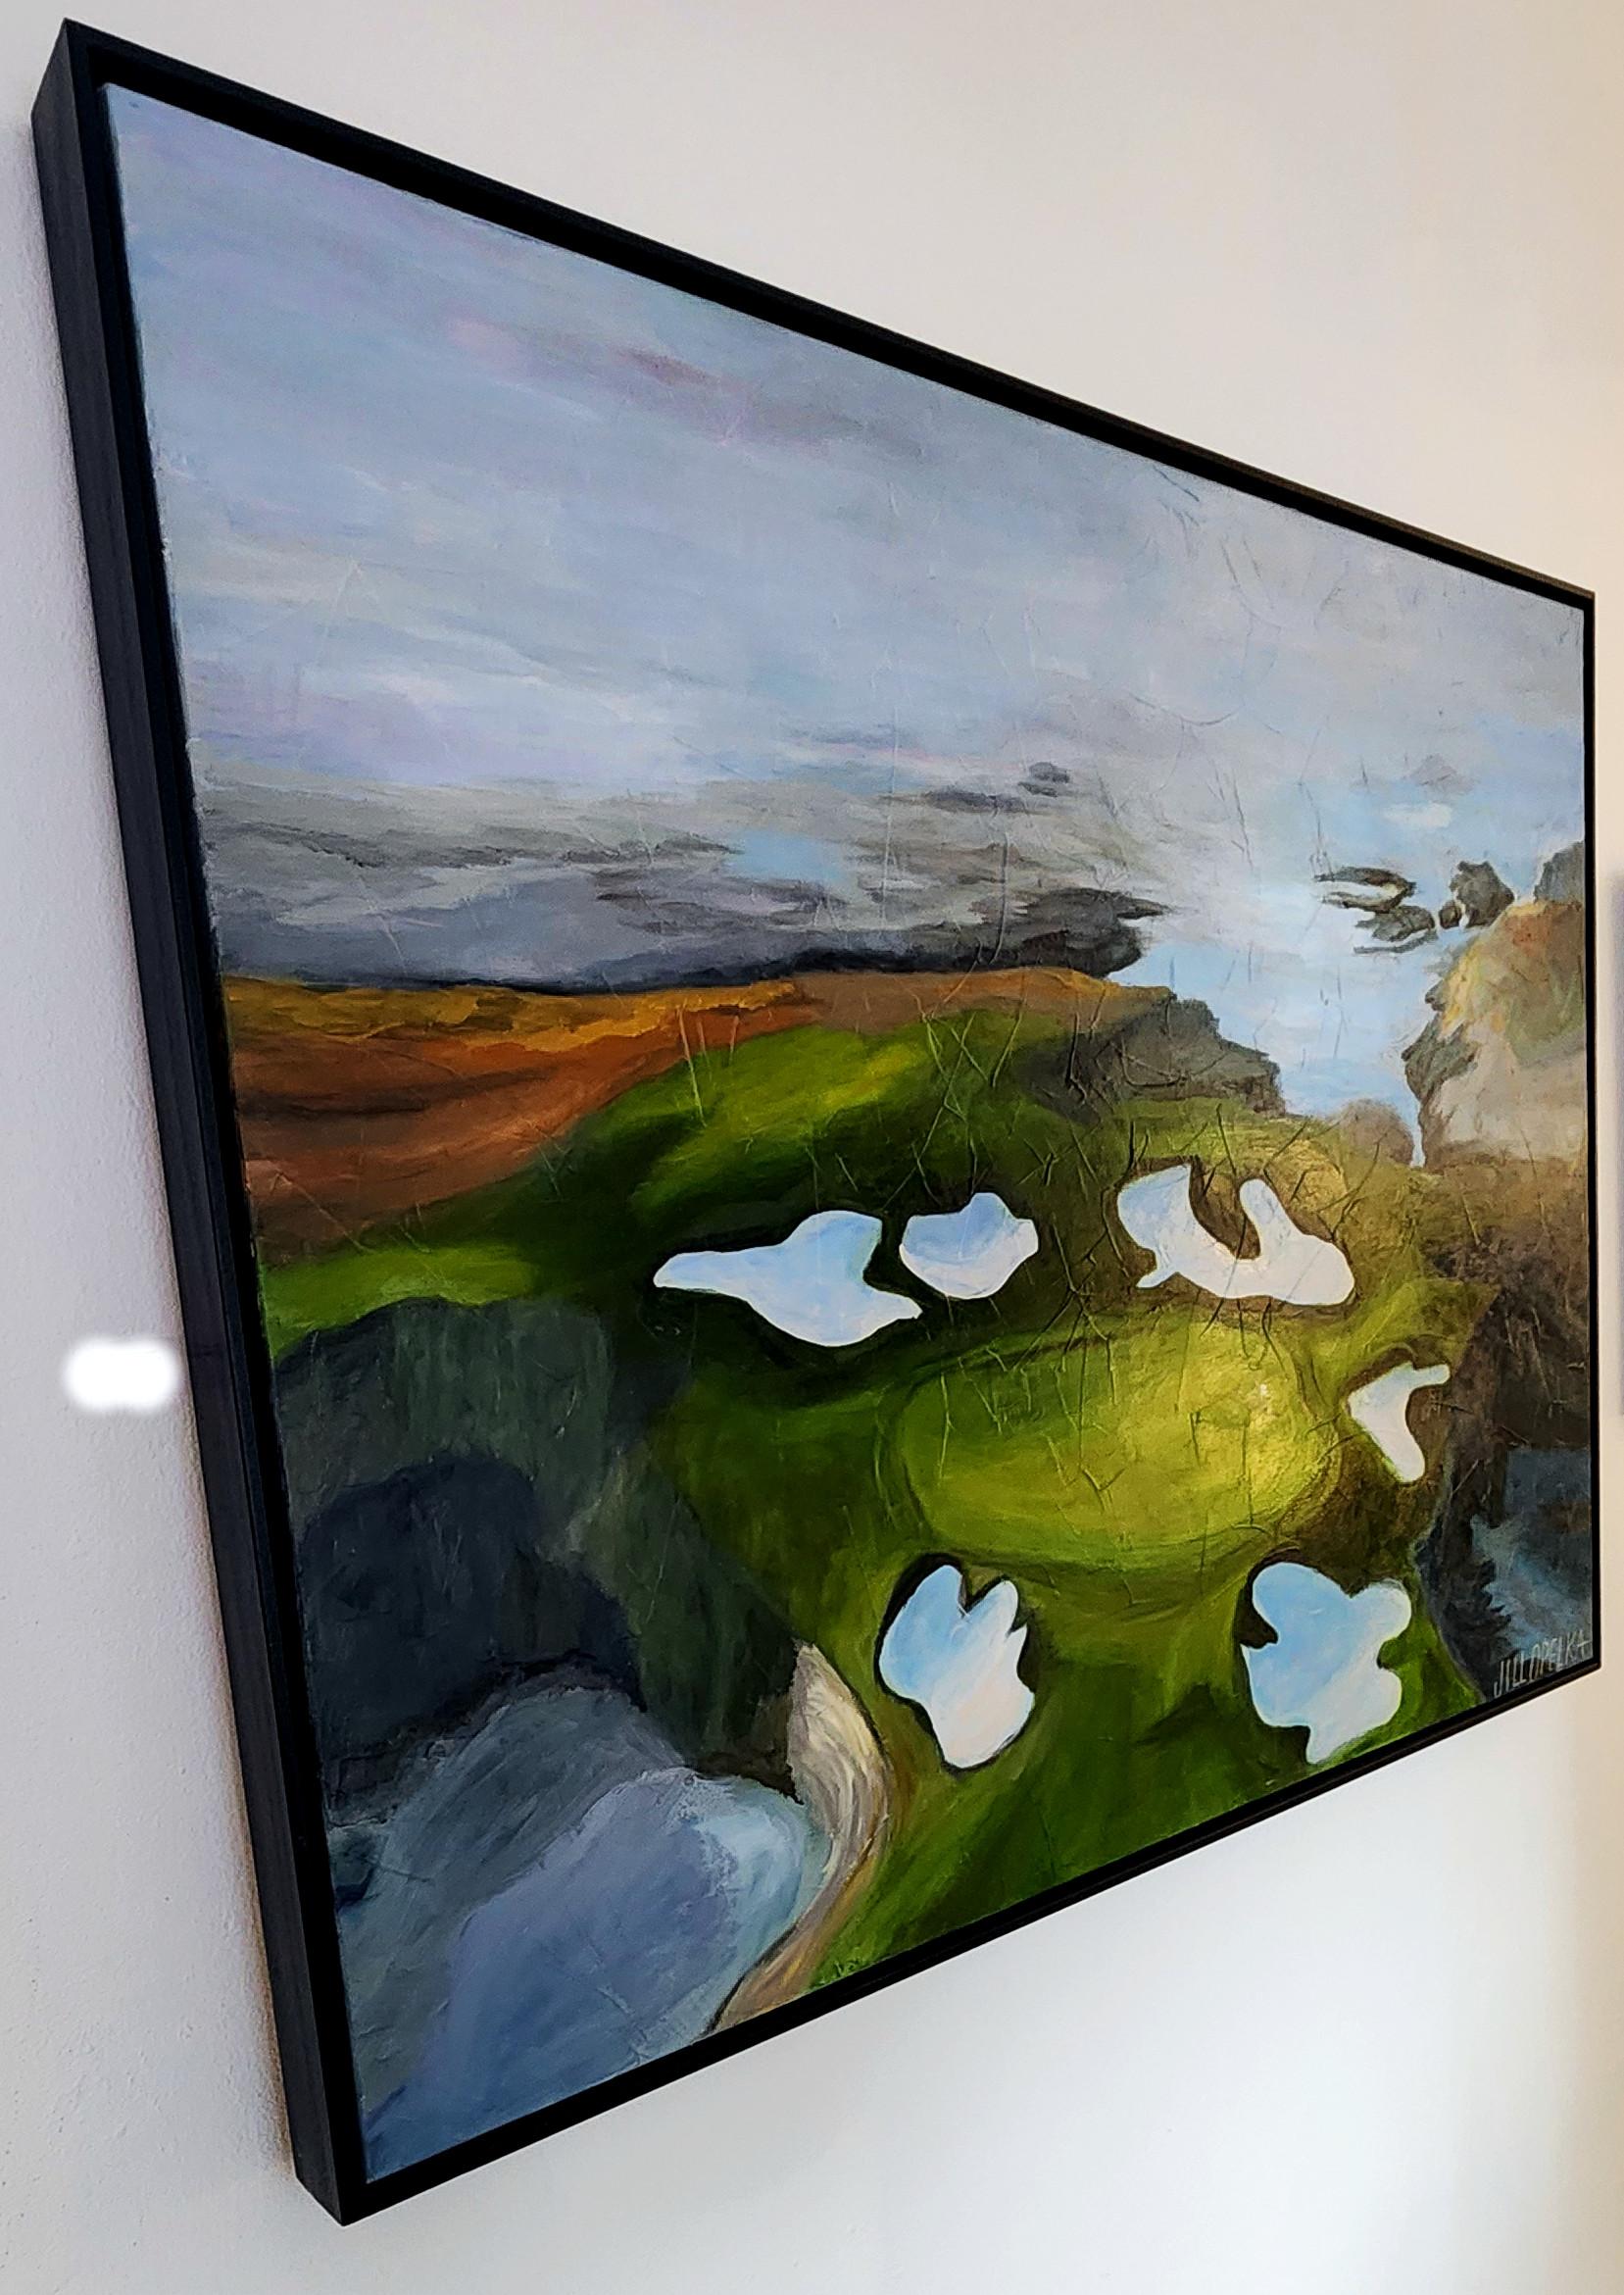 Jill Opelka
Cypress
Oil on Canvas
Year: 2023
Size: 36x48
Framed: 37x49x2.5in
Signed by hand
COA provided
Ref.: 924802-2051

Tags: Landscape, Pebble Beach, California, Golf Course, Monterey Peninsula, Iconic, Bunker, Green, Fairway 

*Framed in a